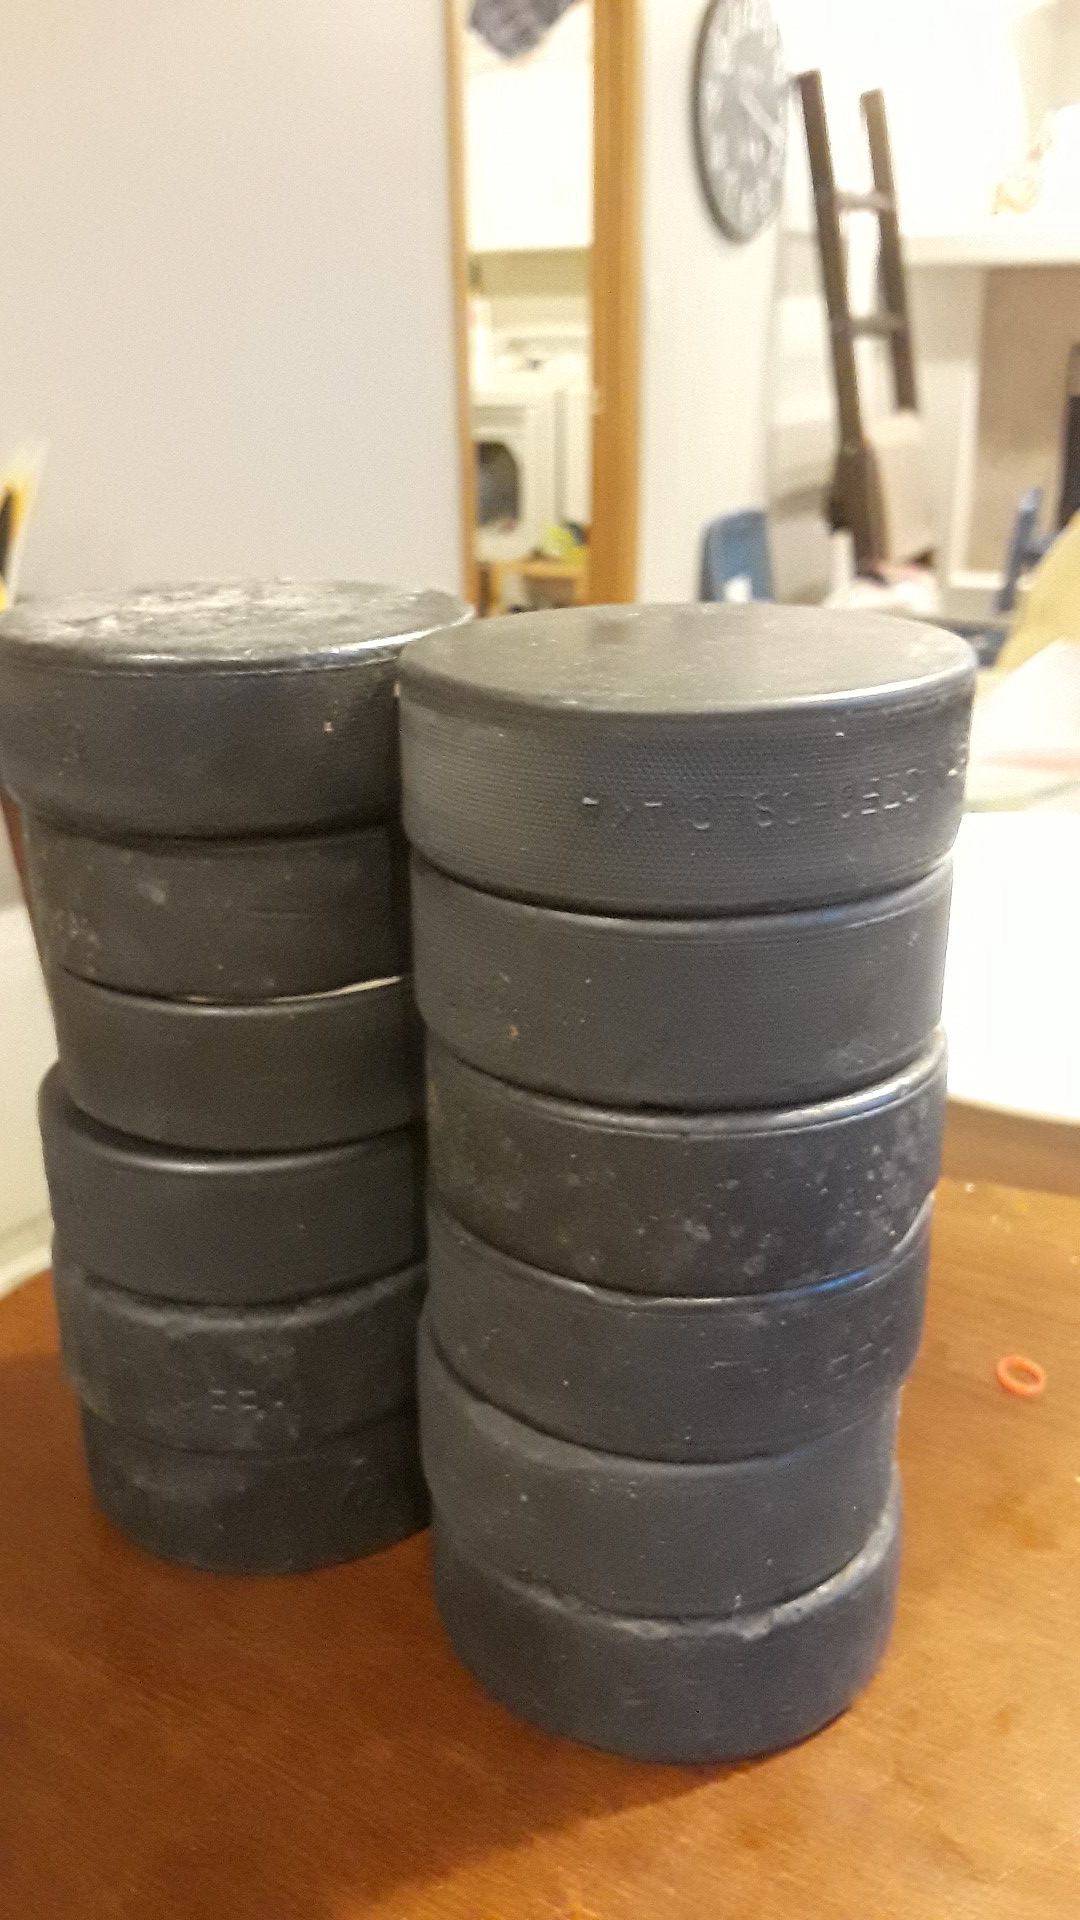 12 Free hockey pucks...great for practice